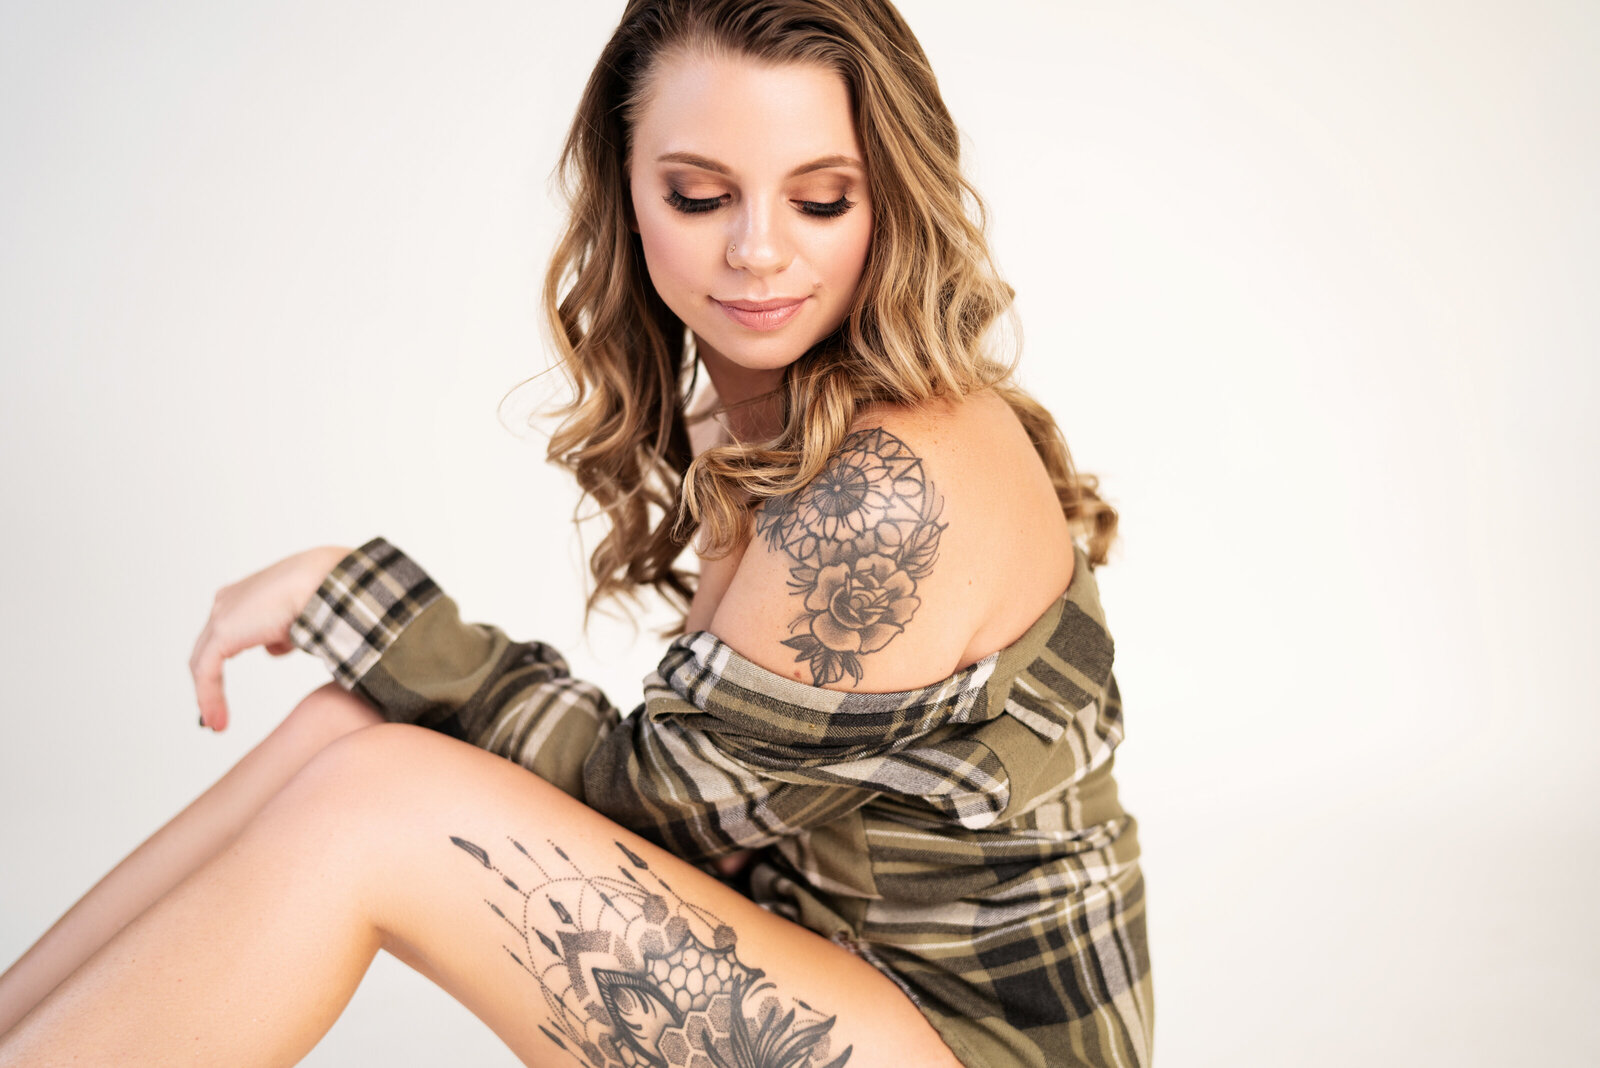 woman sitting on ground in flannel shirt showing tattoos